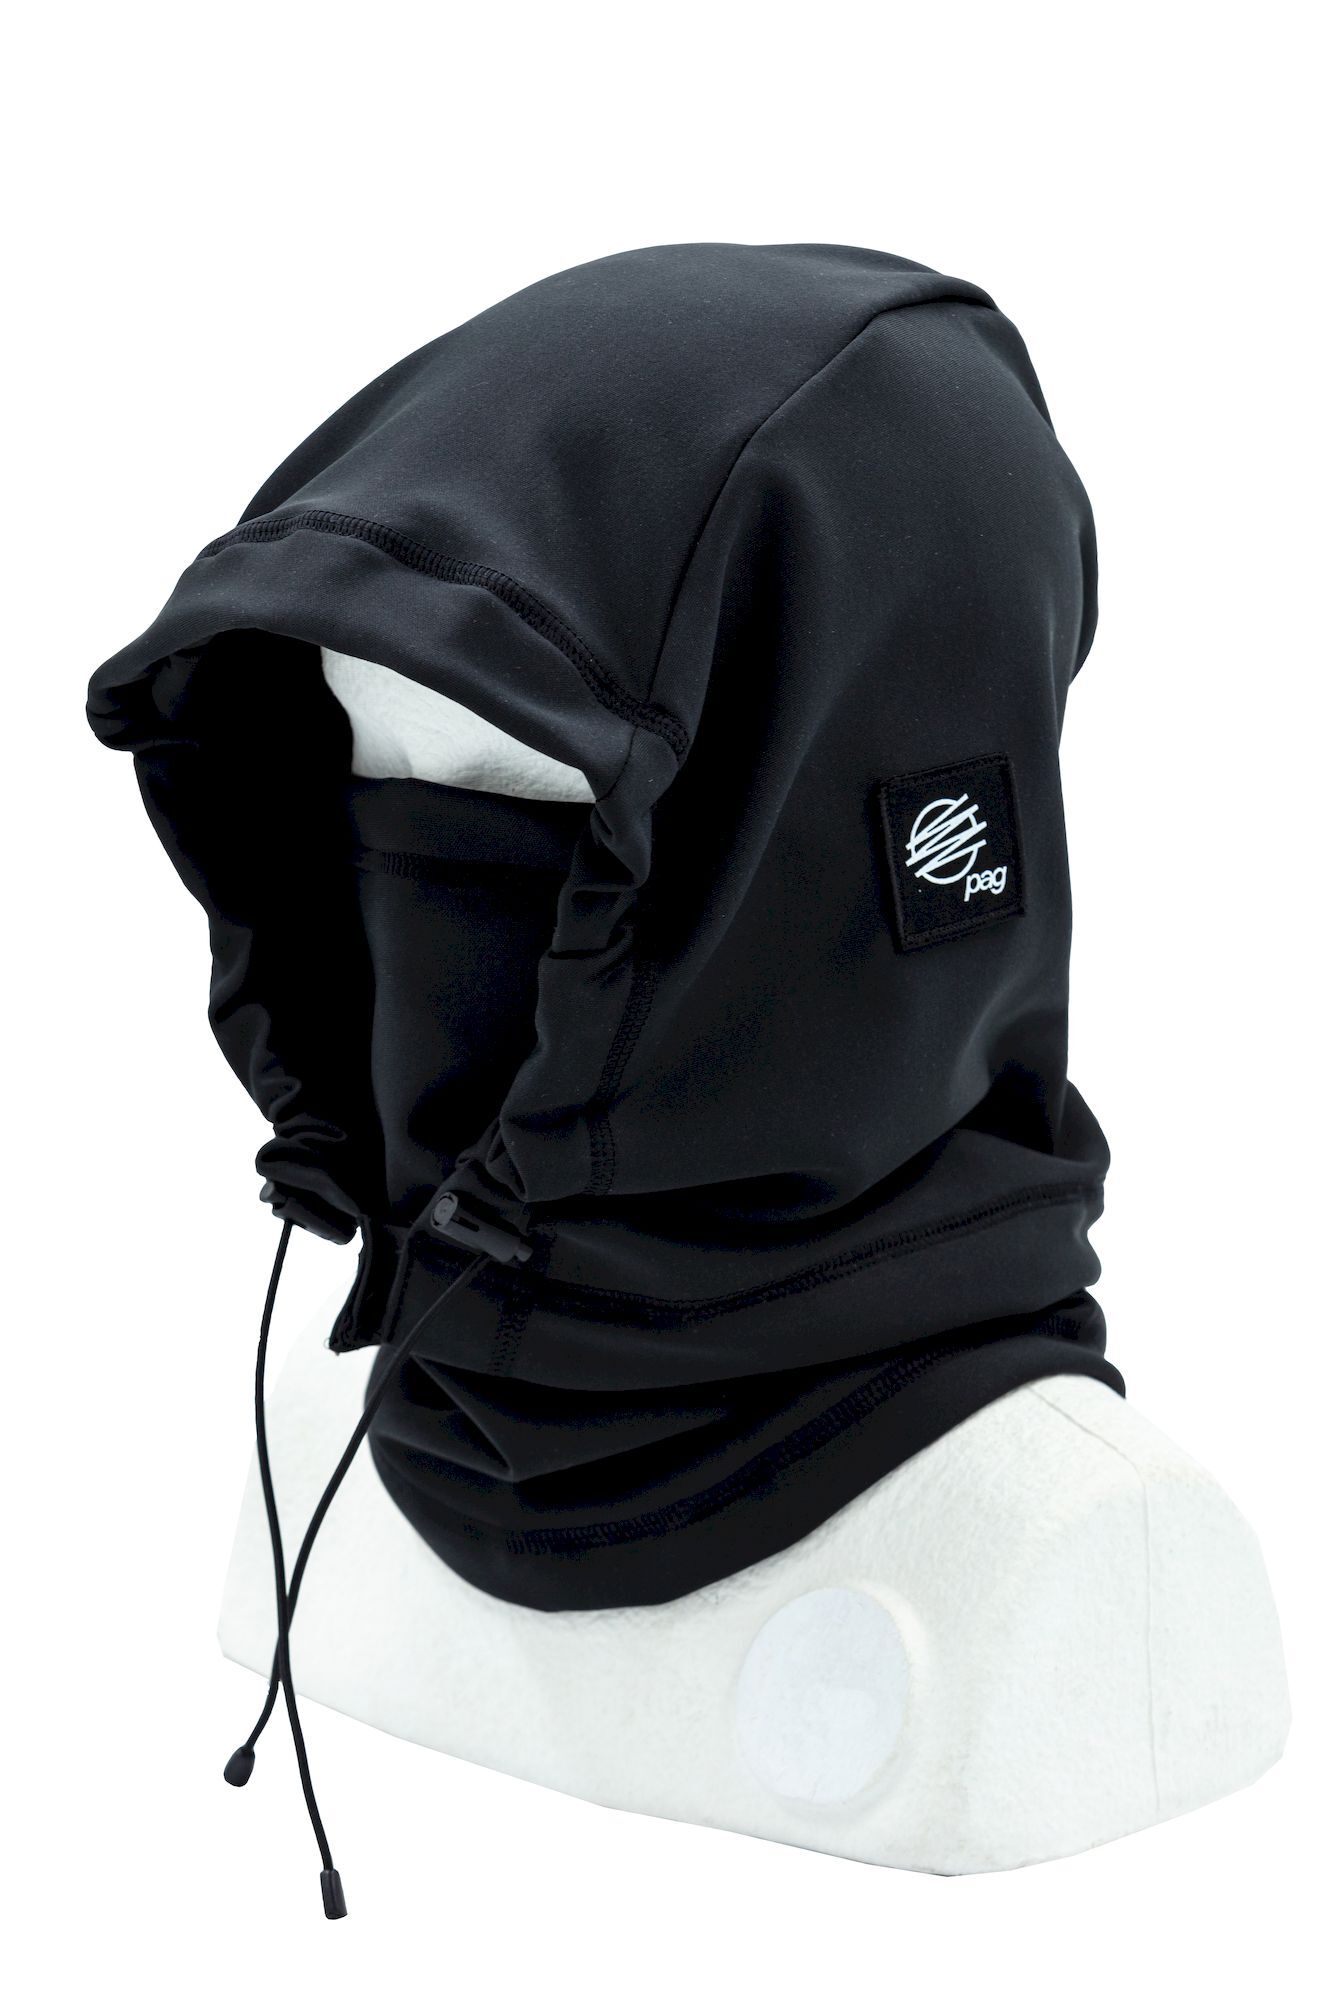 PAG Neckwear Hooded Adapt - Stormhætte